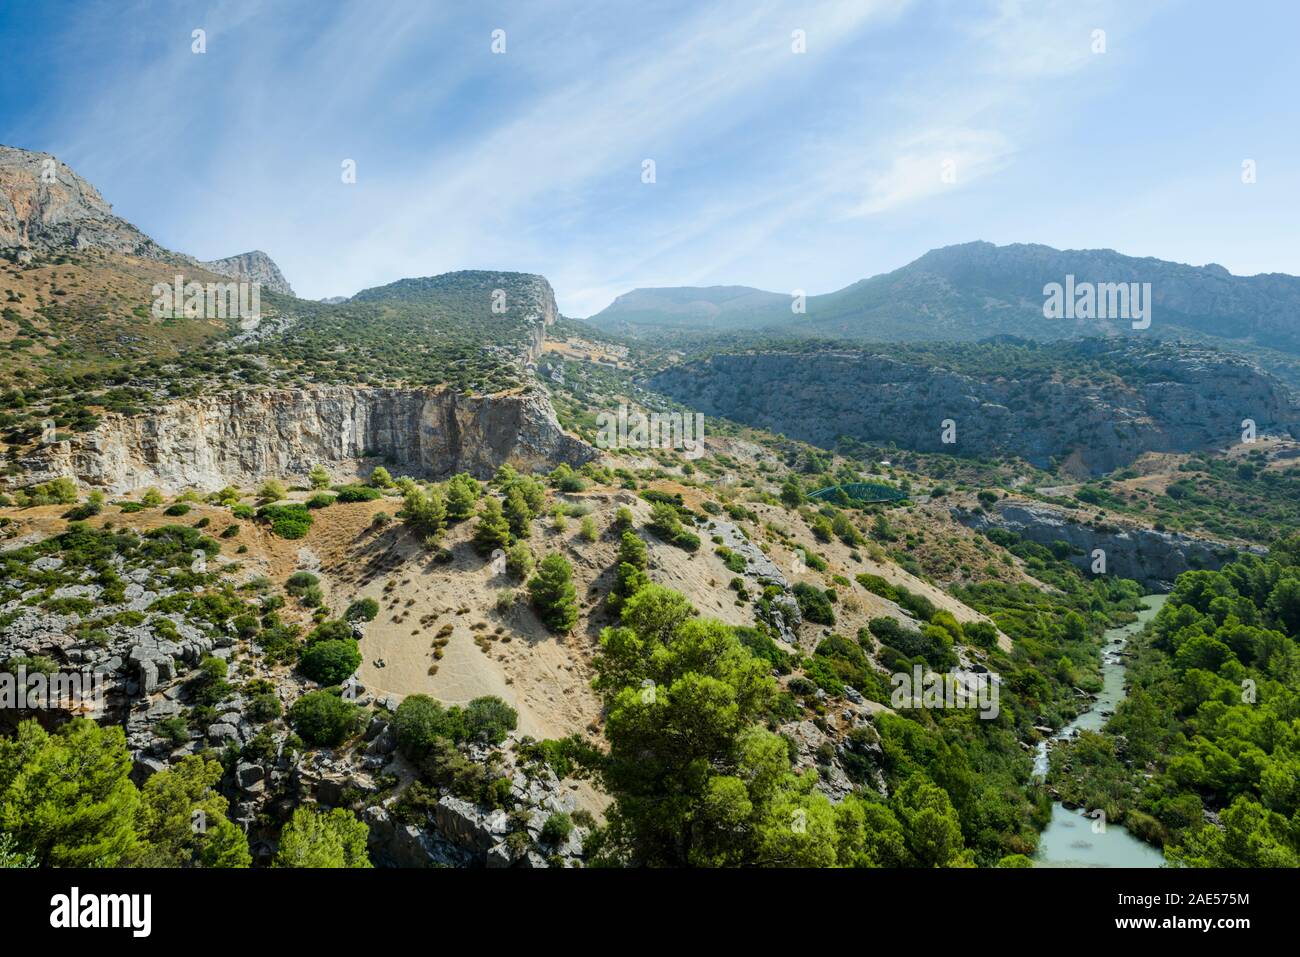 Panoramic of the Valley of the Hole in Natural Site of Desfiladero de los Gaitanes, Ardales, Malaga, Spain Stock Photo